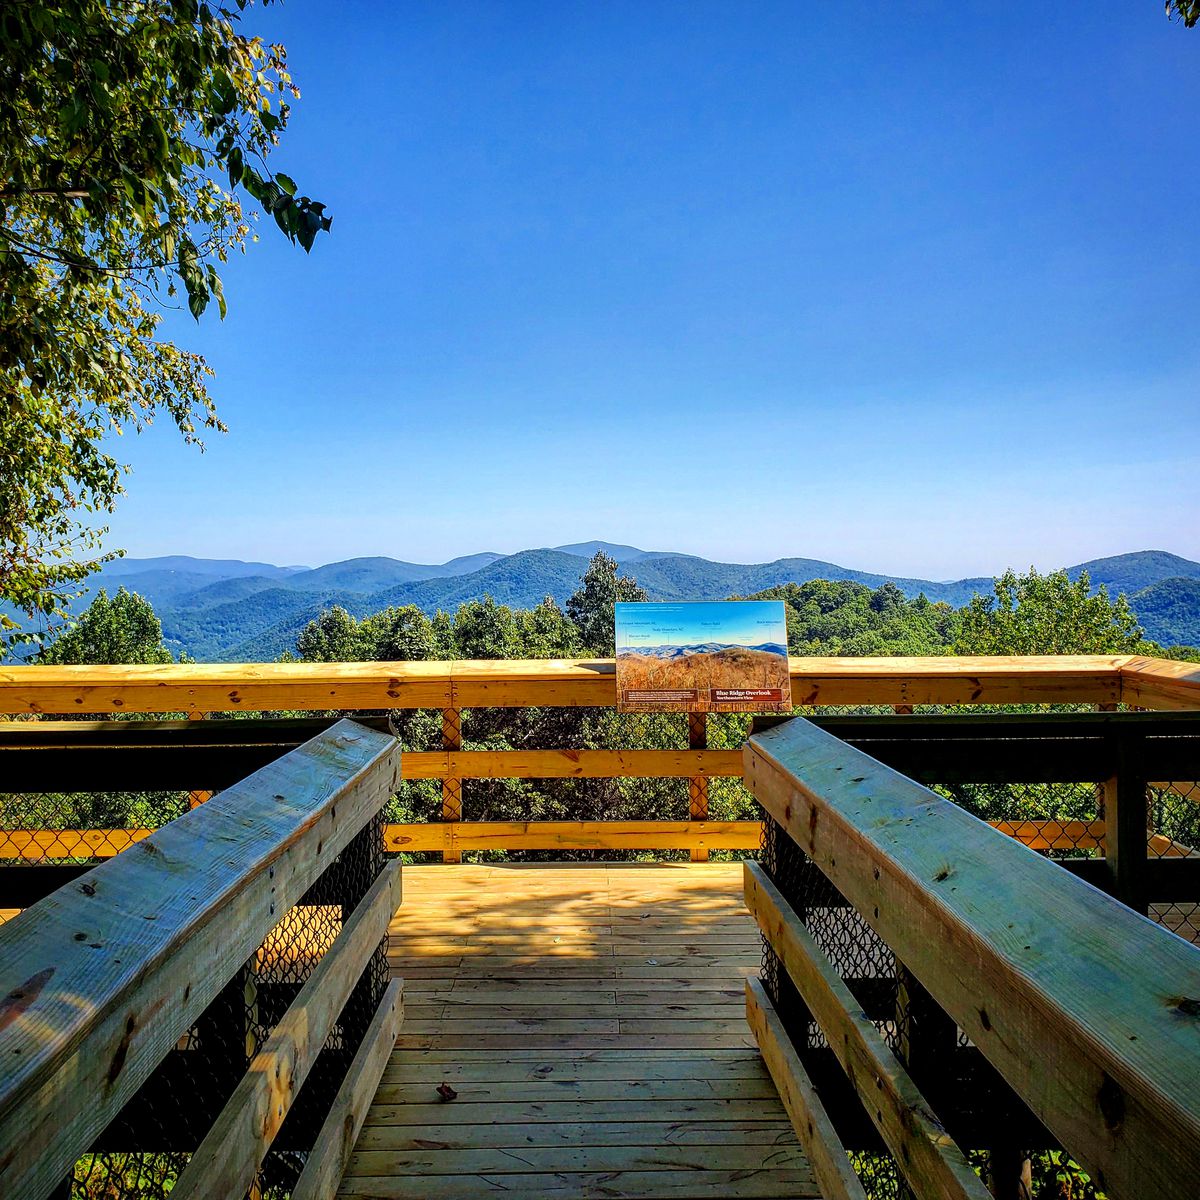 An observation deck overlooking the Black Rock Mountains beyond in the mountains of North Georgia